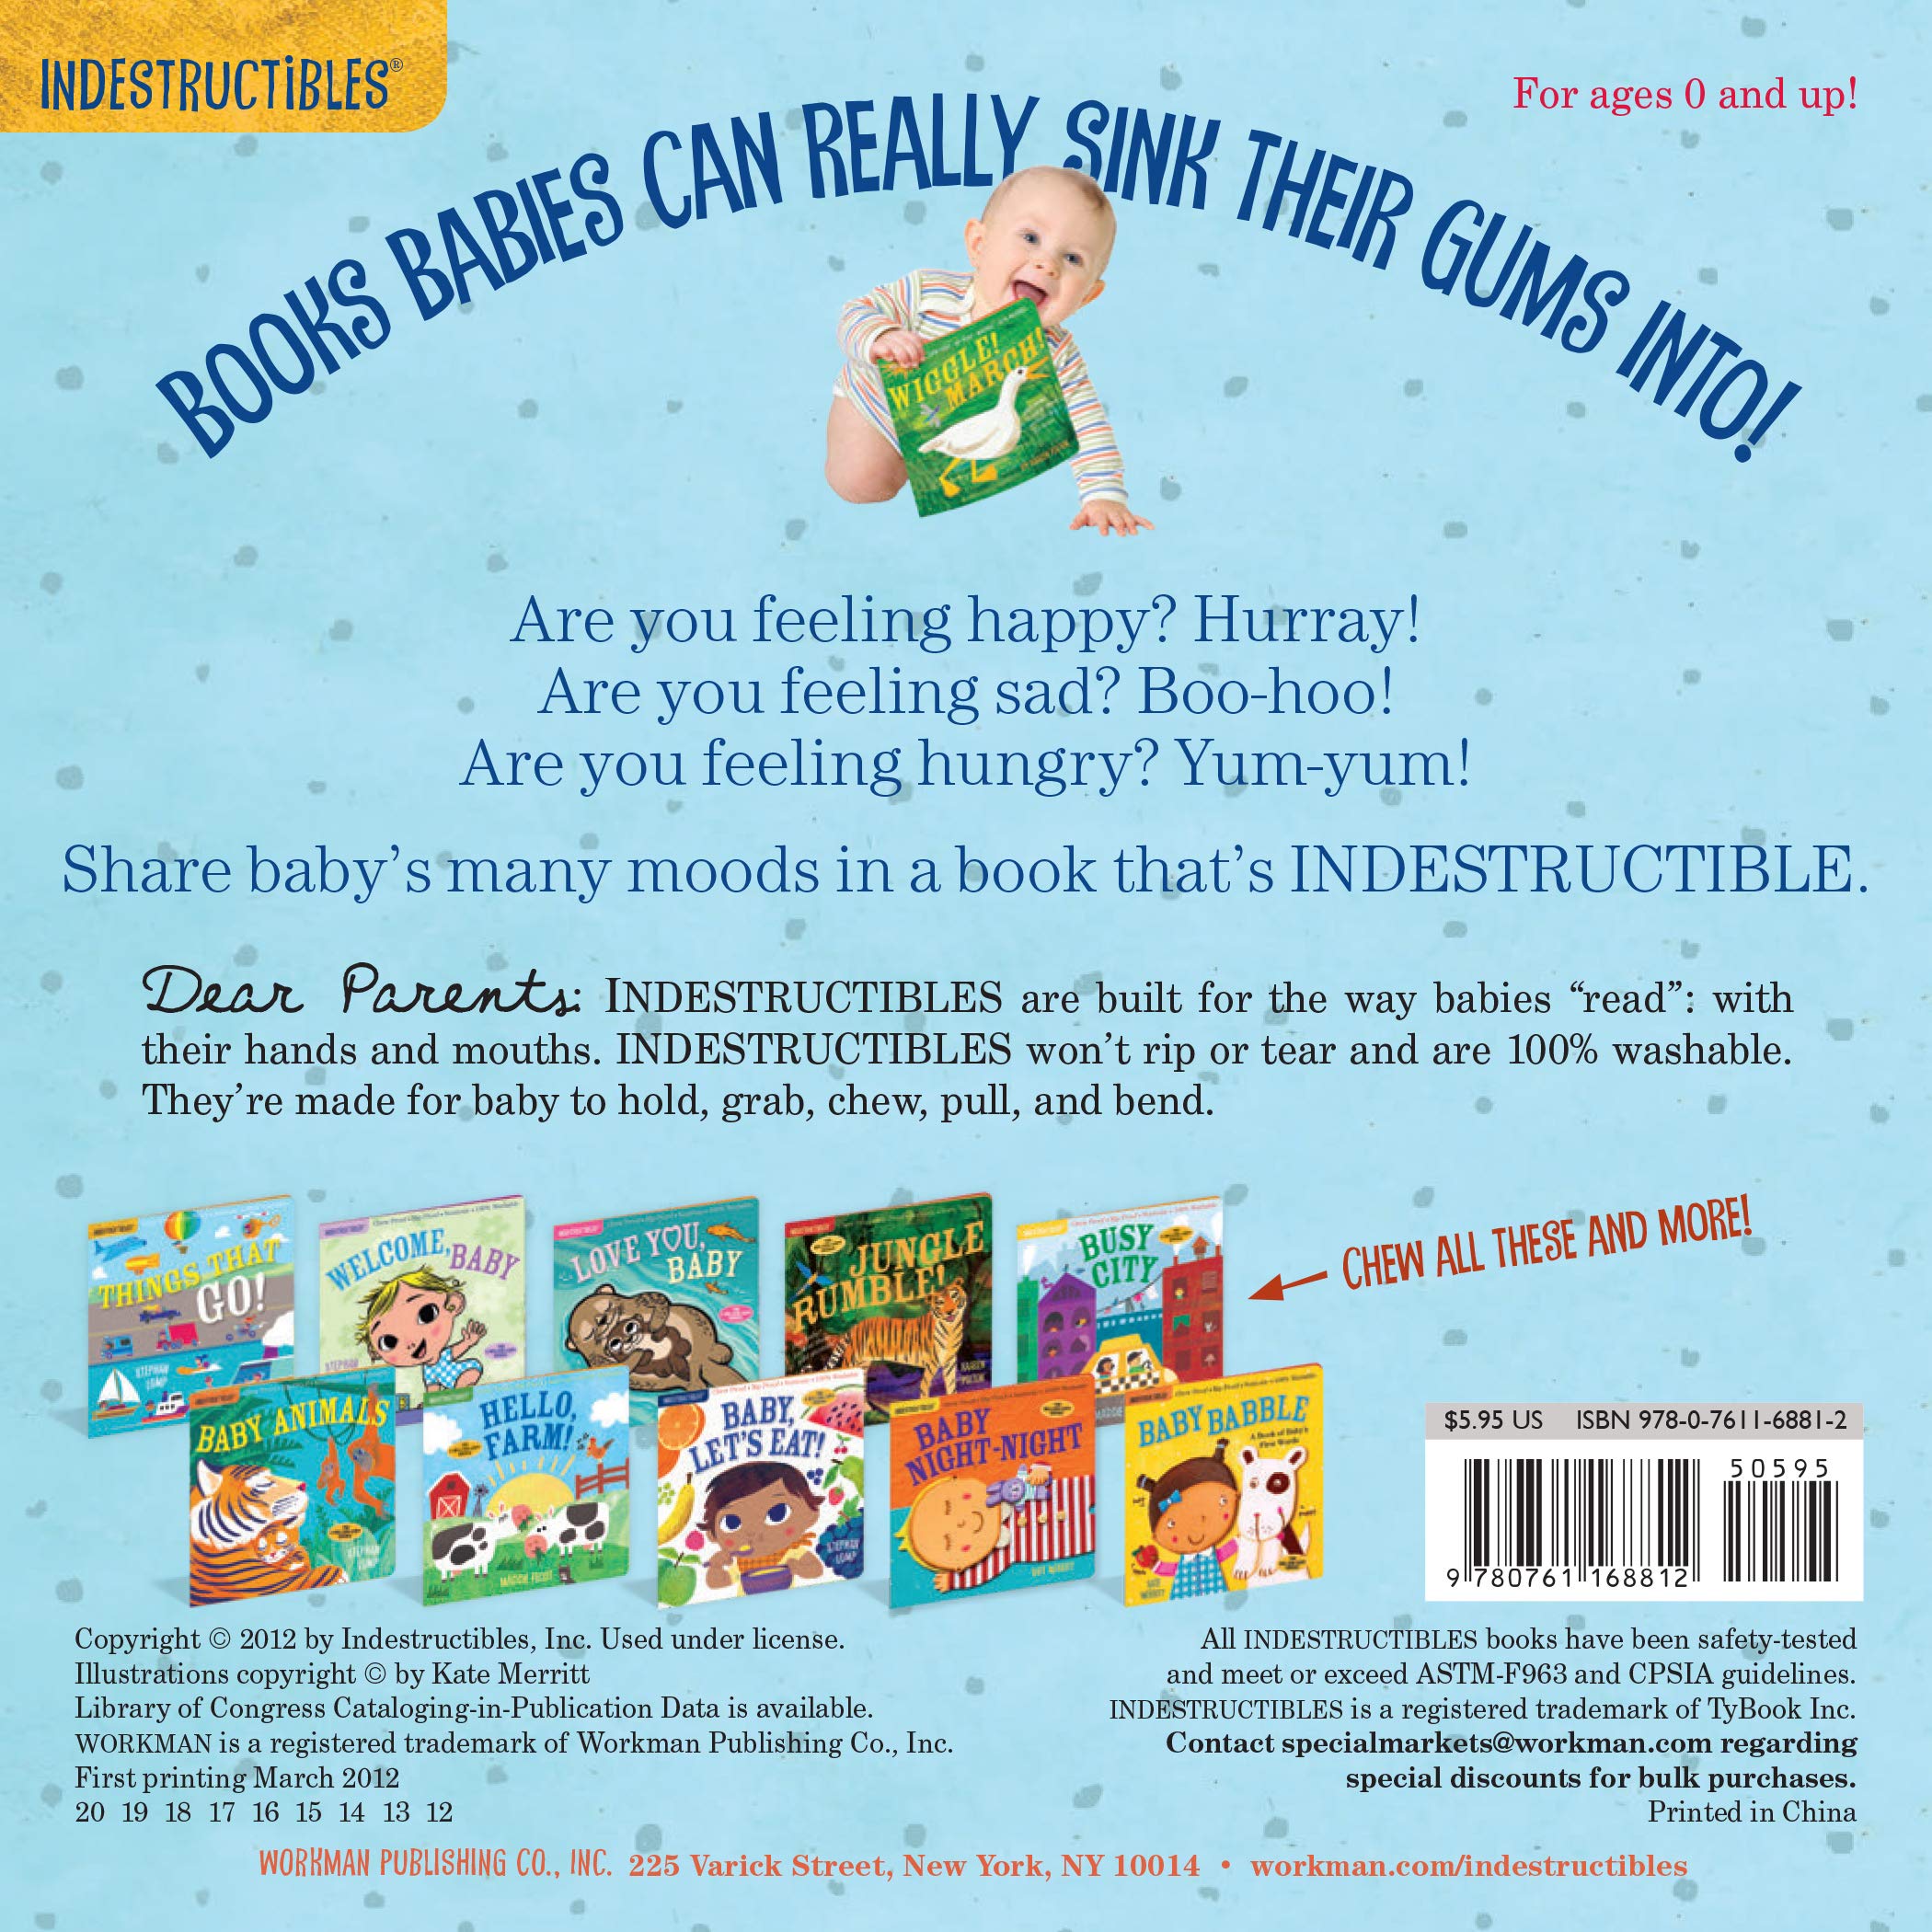 Indestructibles: Baby Faces: A Book of Happy, Silly, Funny Faces-HACHETTE BOOK GROUP USA-Little Giant Kidz